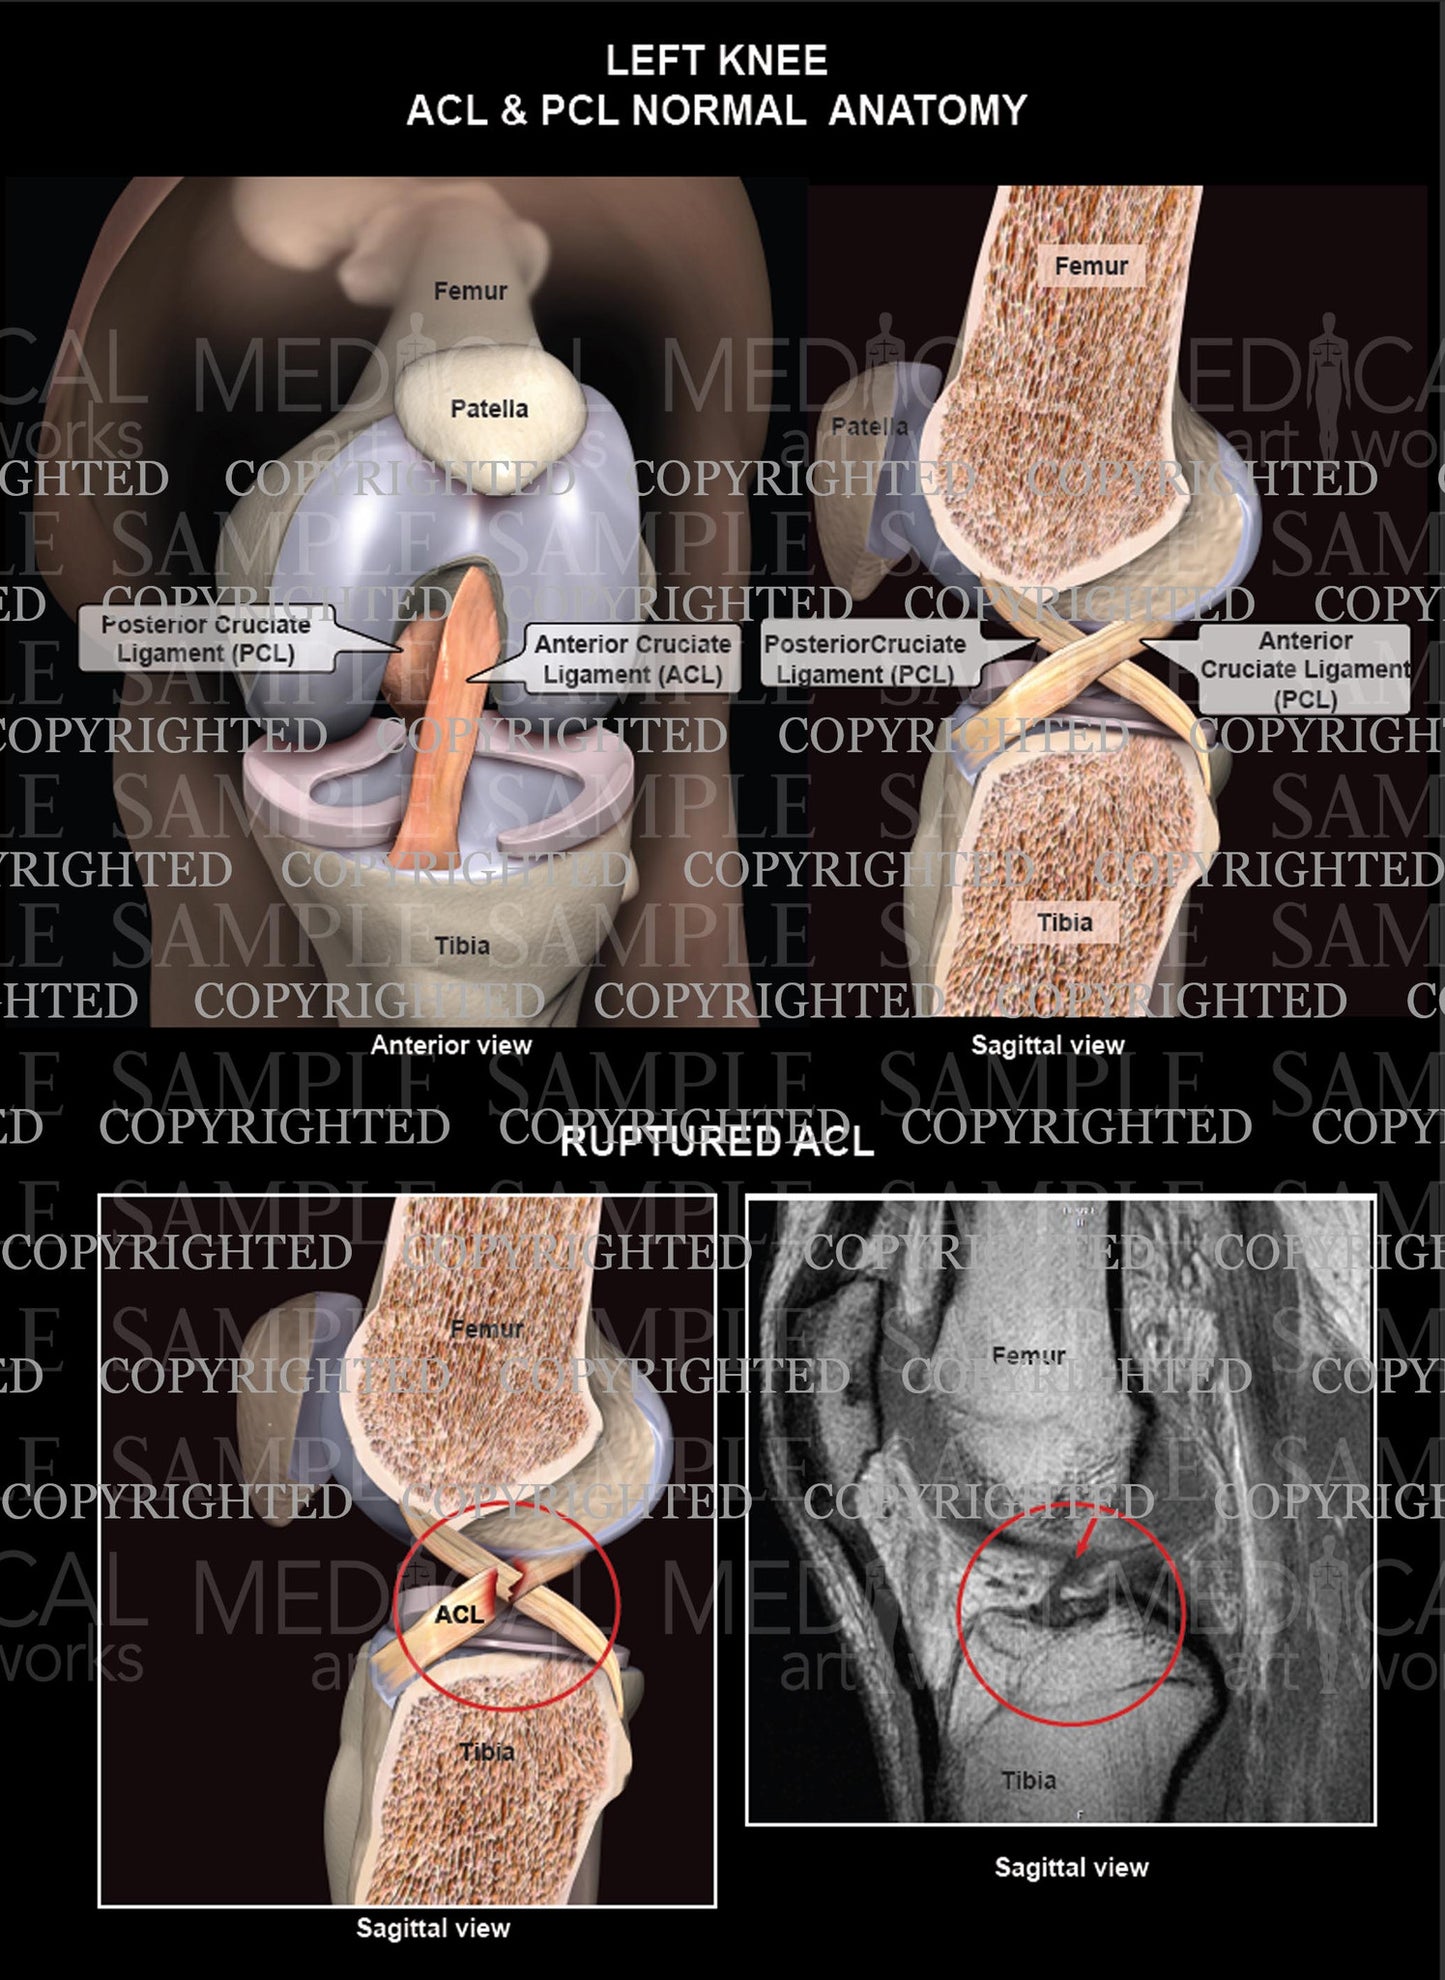 Normal ACL & PCL Left Knee Anatomy - Ruptured ACL - MRI of Ruptured ACL